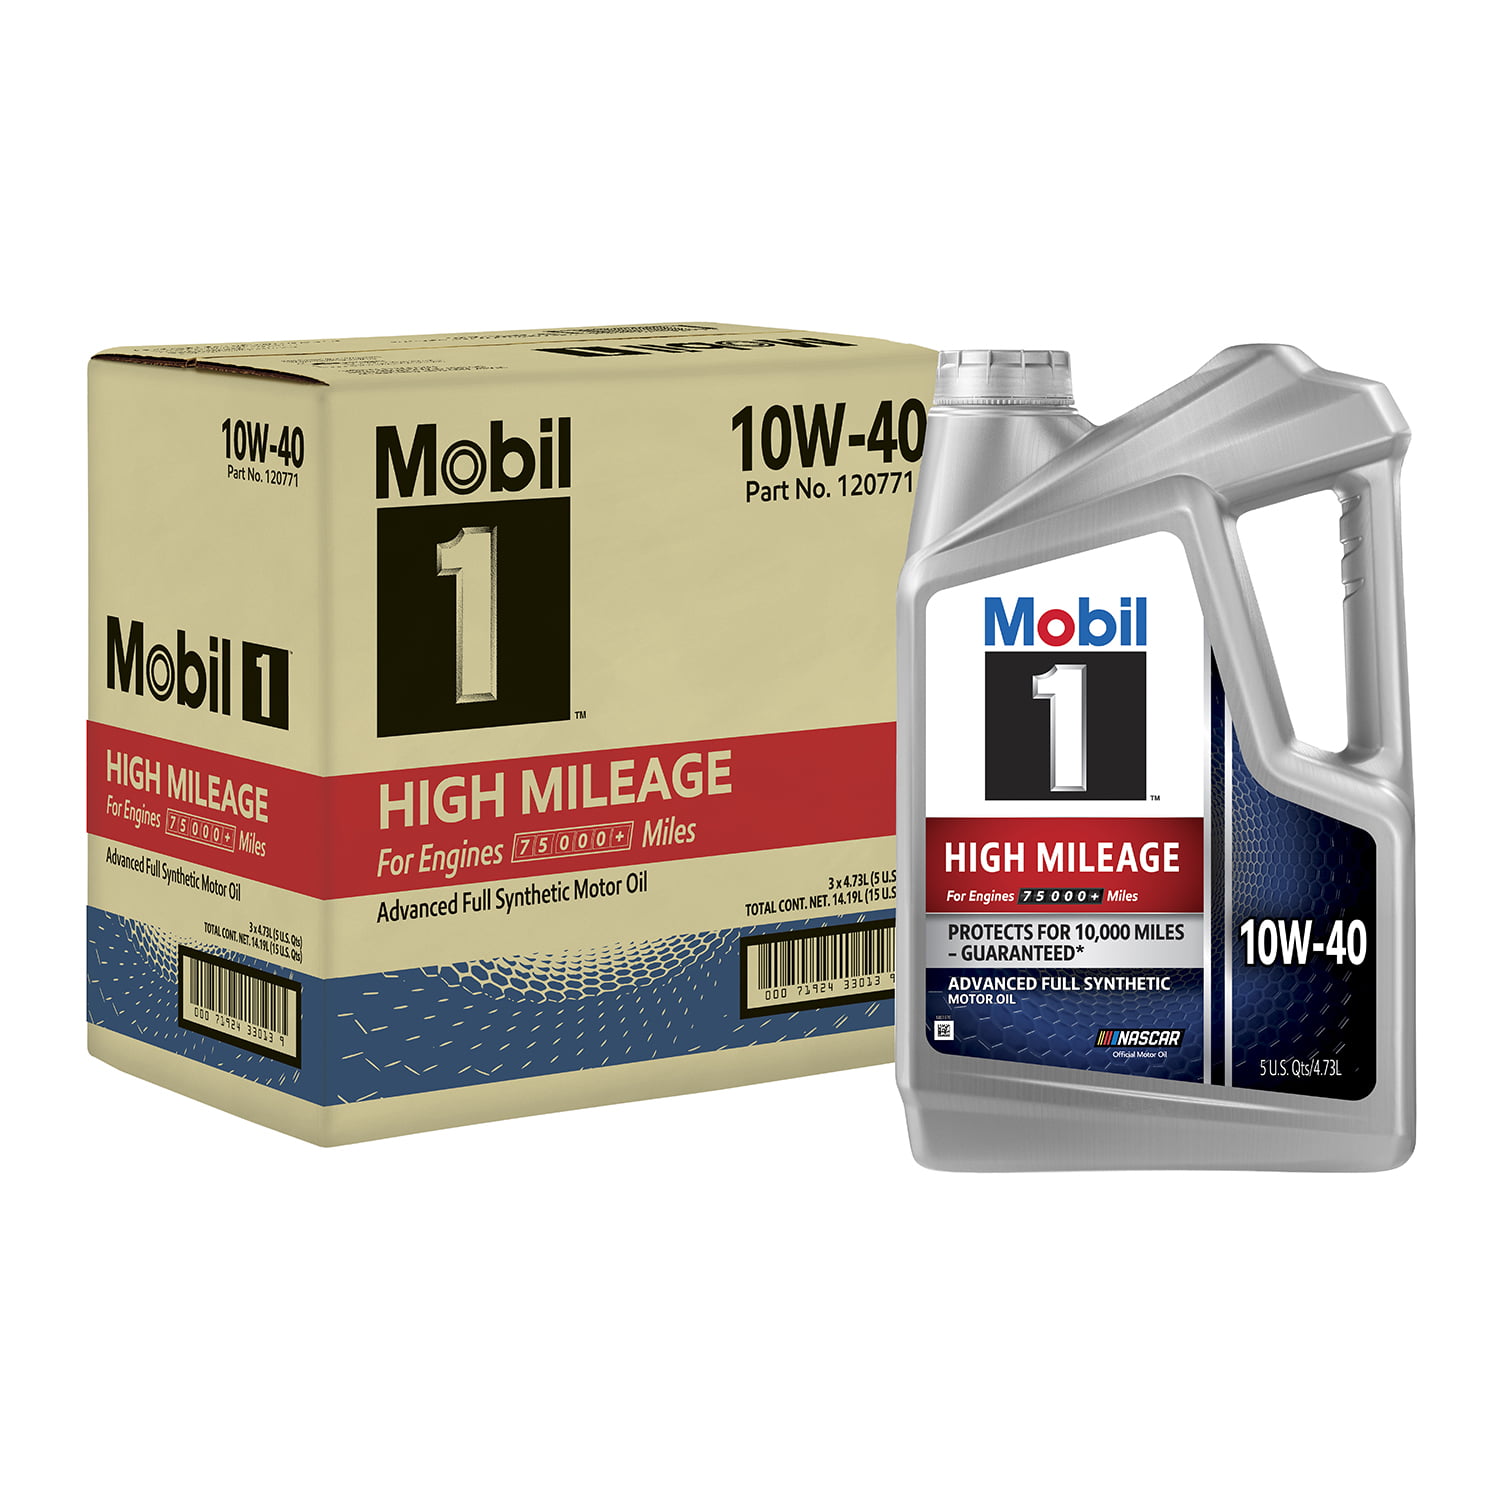 Mobil 1 High Mileage Full Synthetic Motor Oil 10W-40, 5 qt (3 Pack) - 1